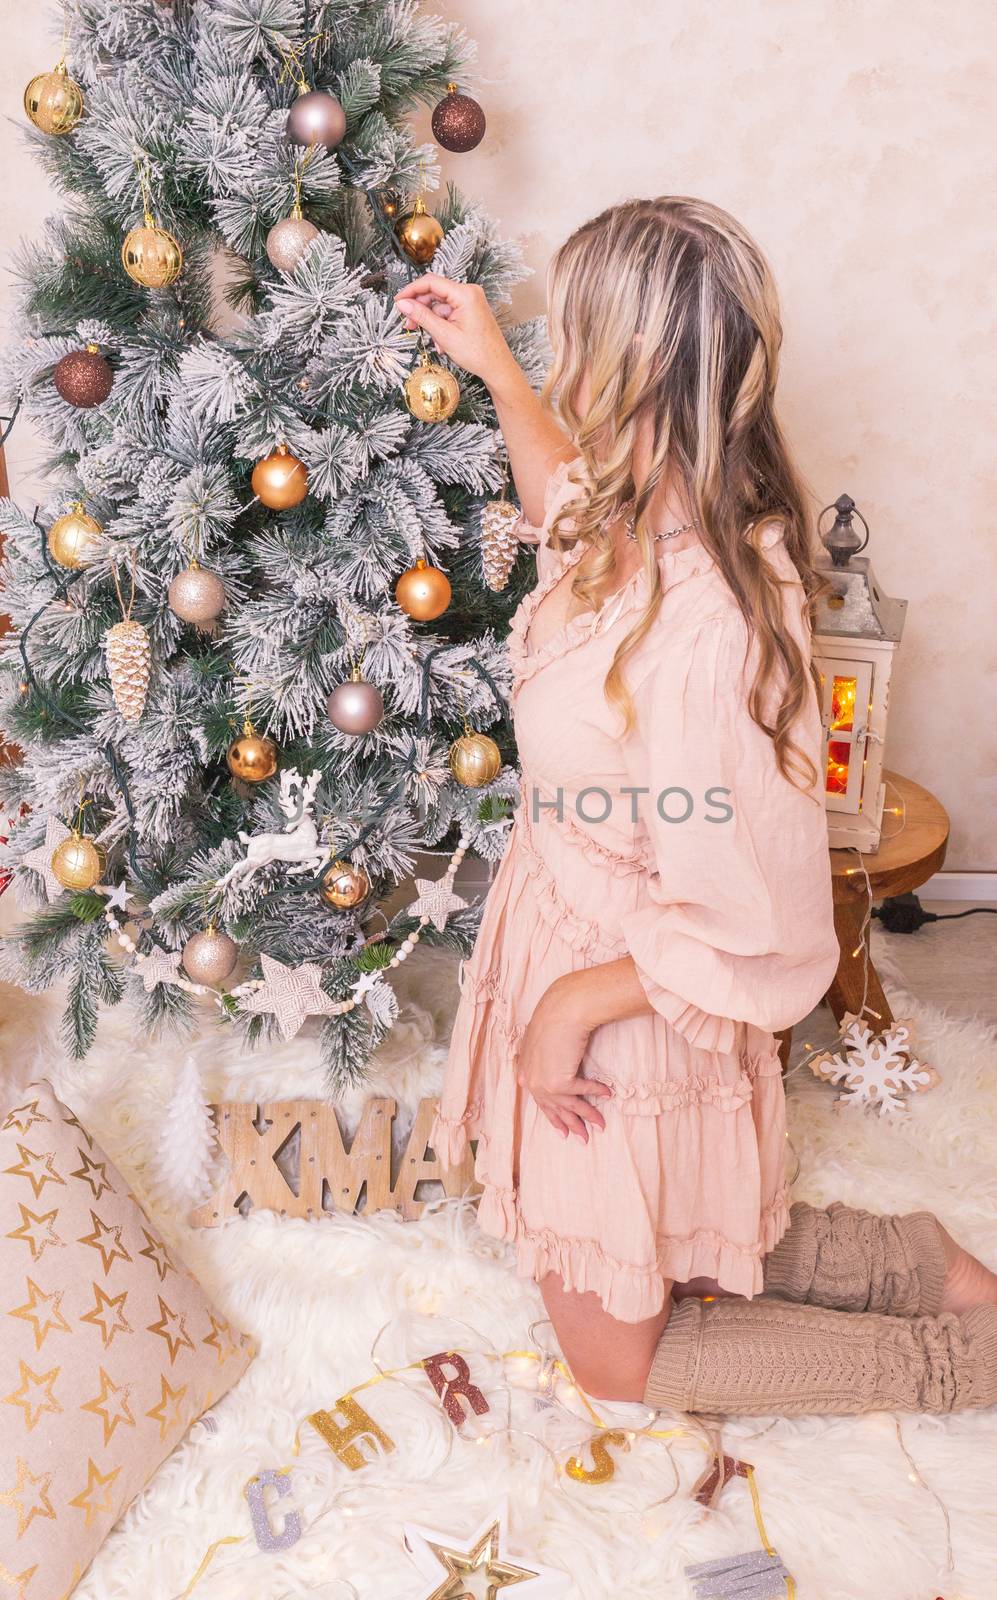 Decorating a Christmas tree by lovleah